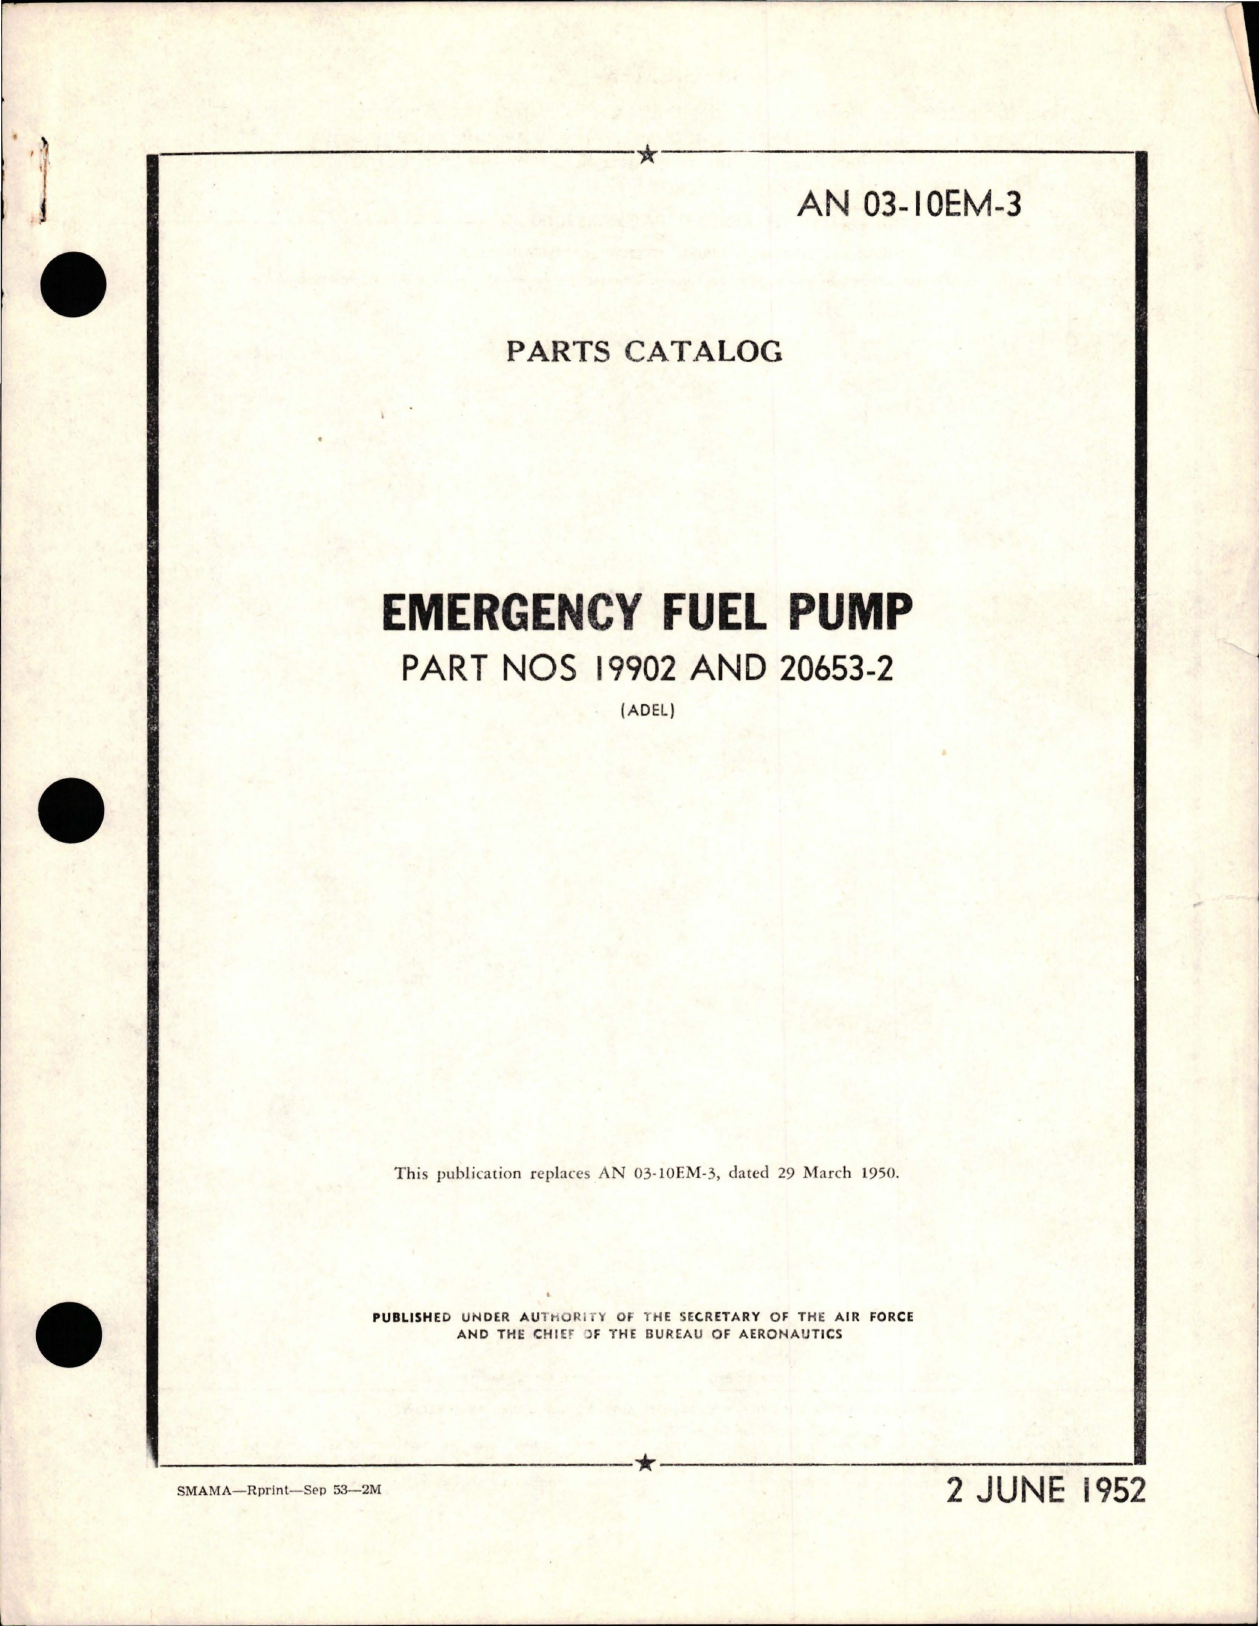 Sample page 1 from AirCorps Library document: Parts Catalog for Emergency Fuel Pump - Parts 19902 and 20653-2